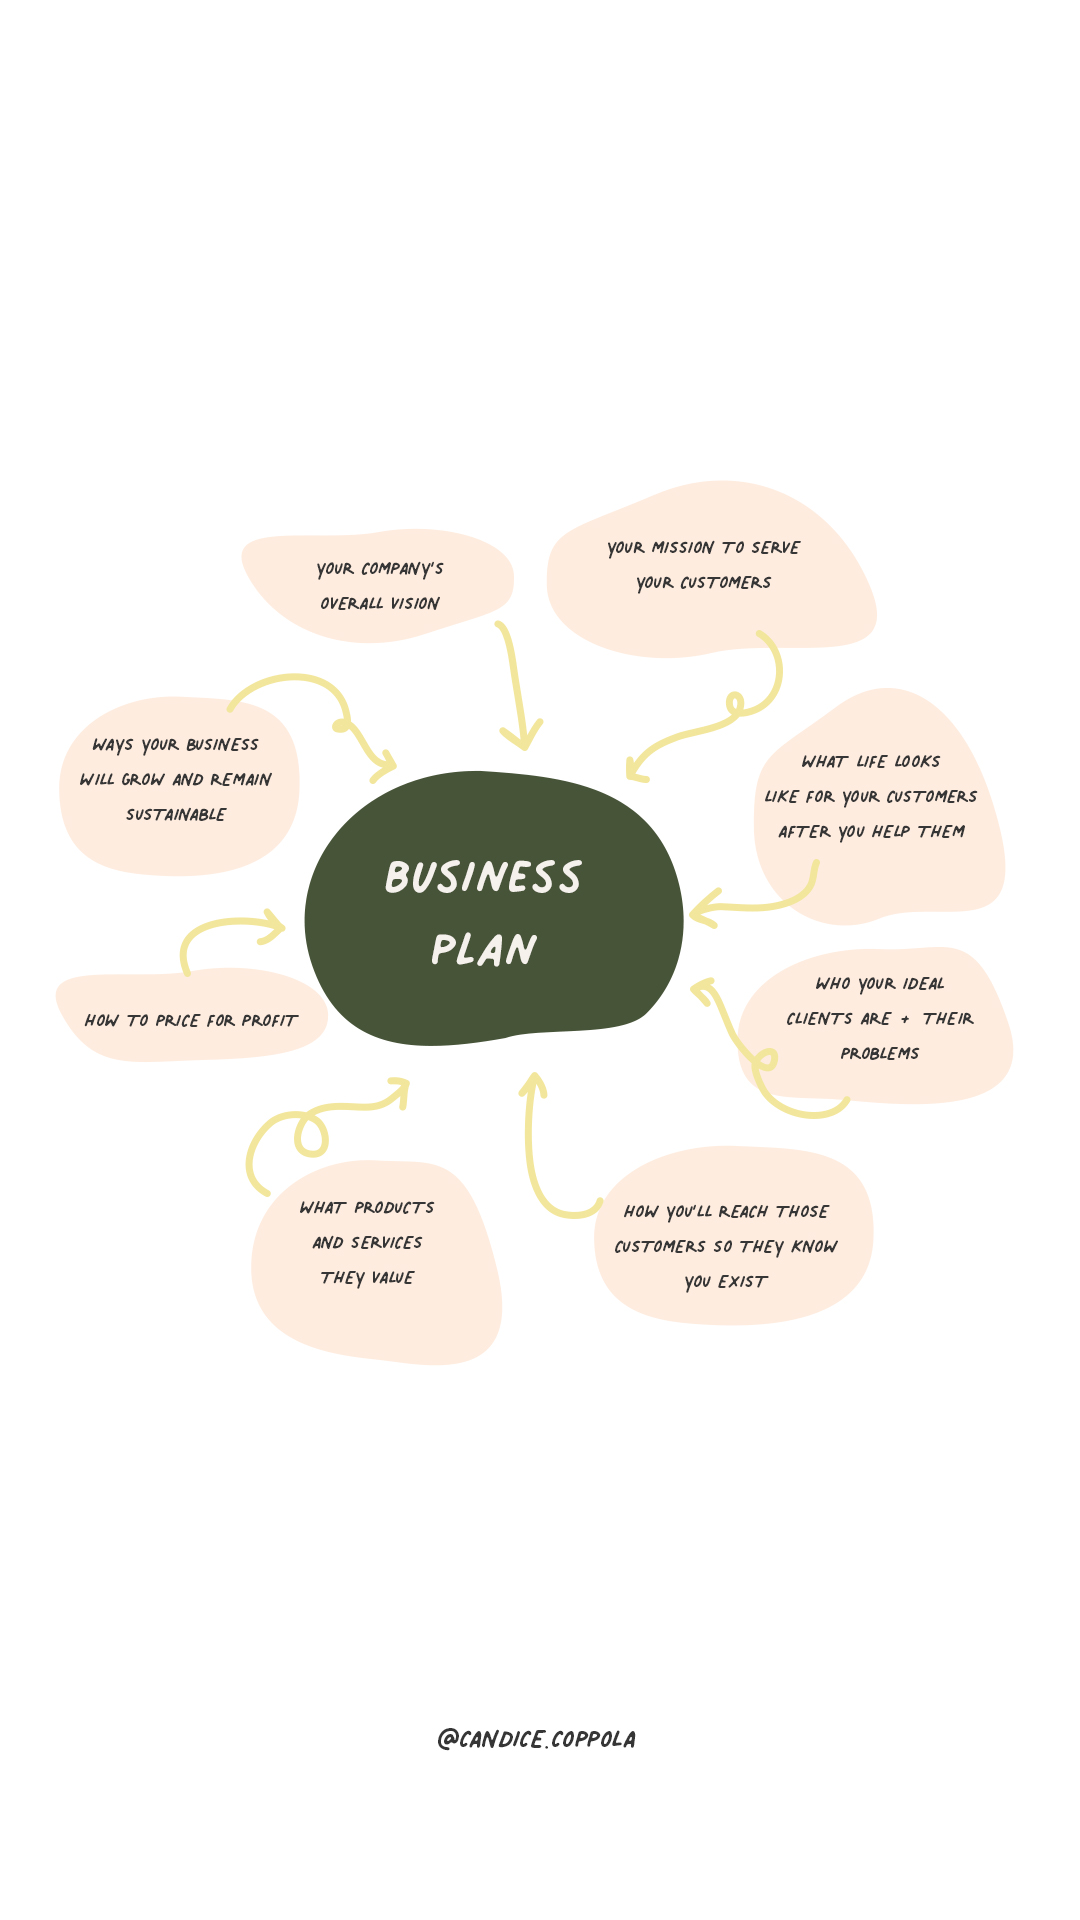 business plan for wedding planner services